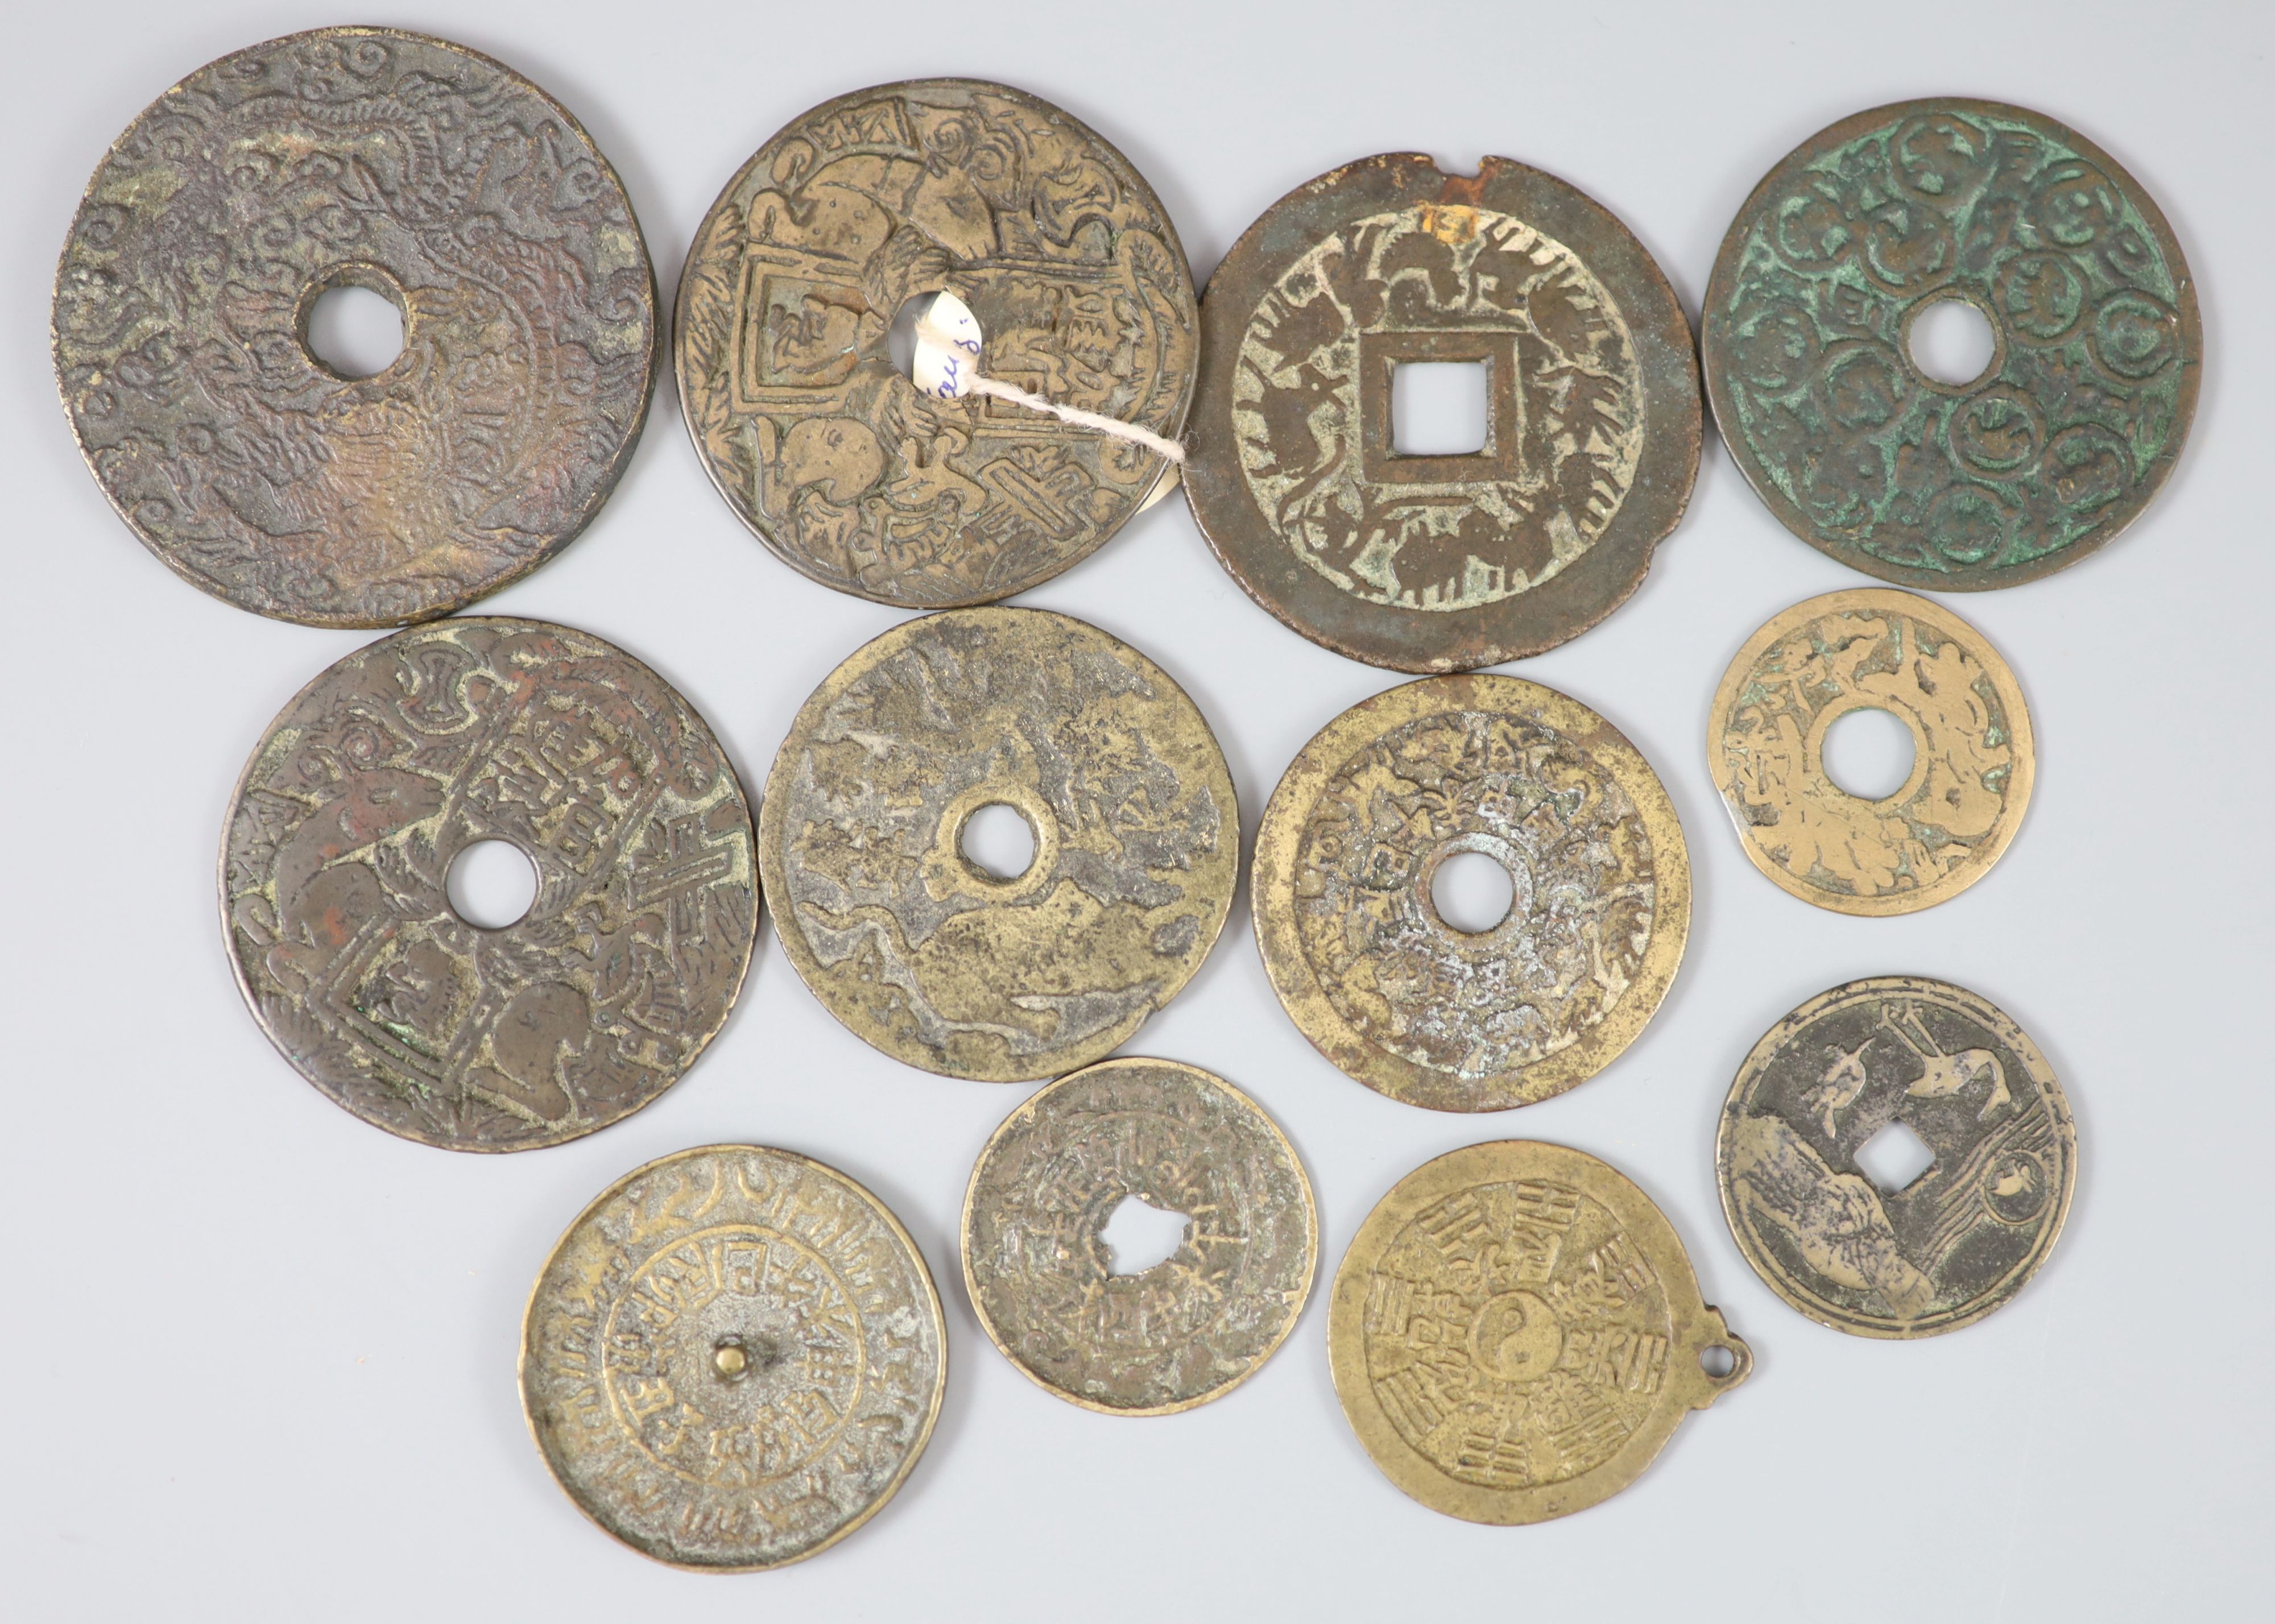 China, 12 bronze charms or amulets, Qing dynasty,